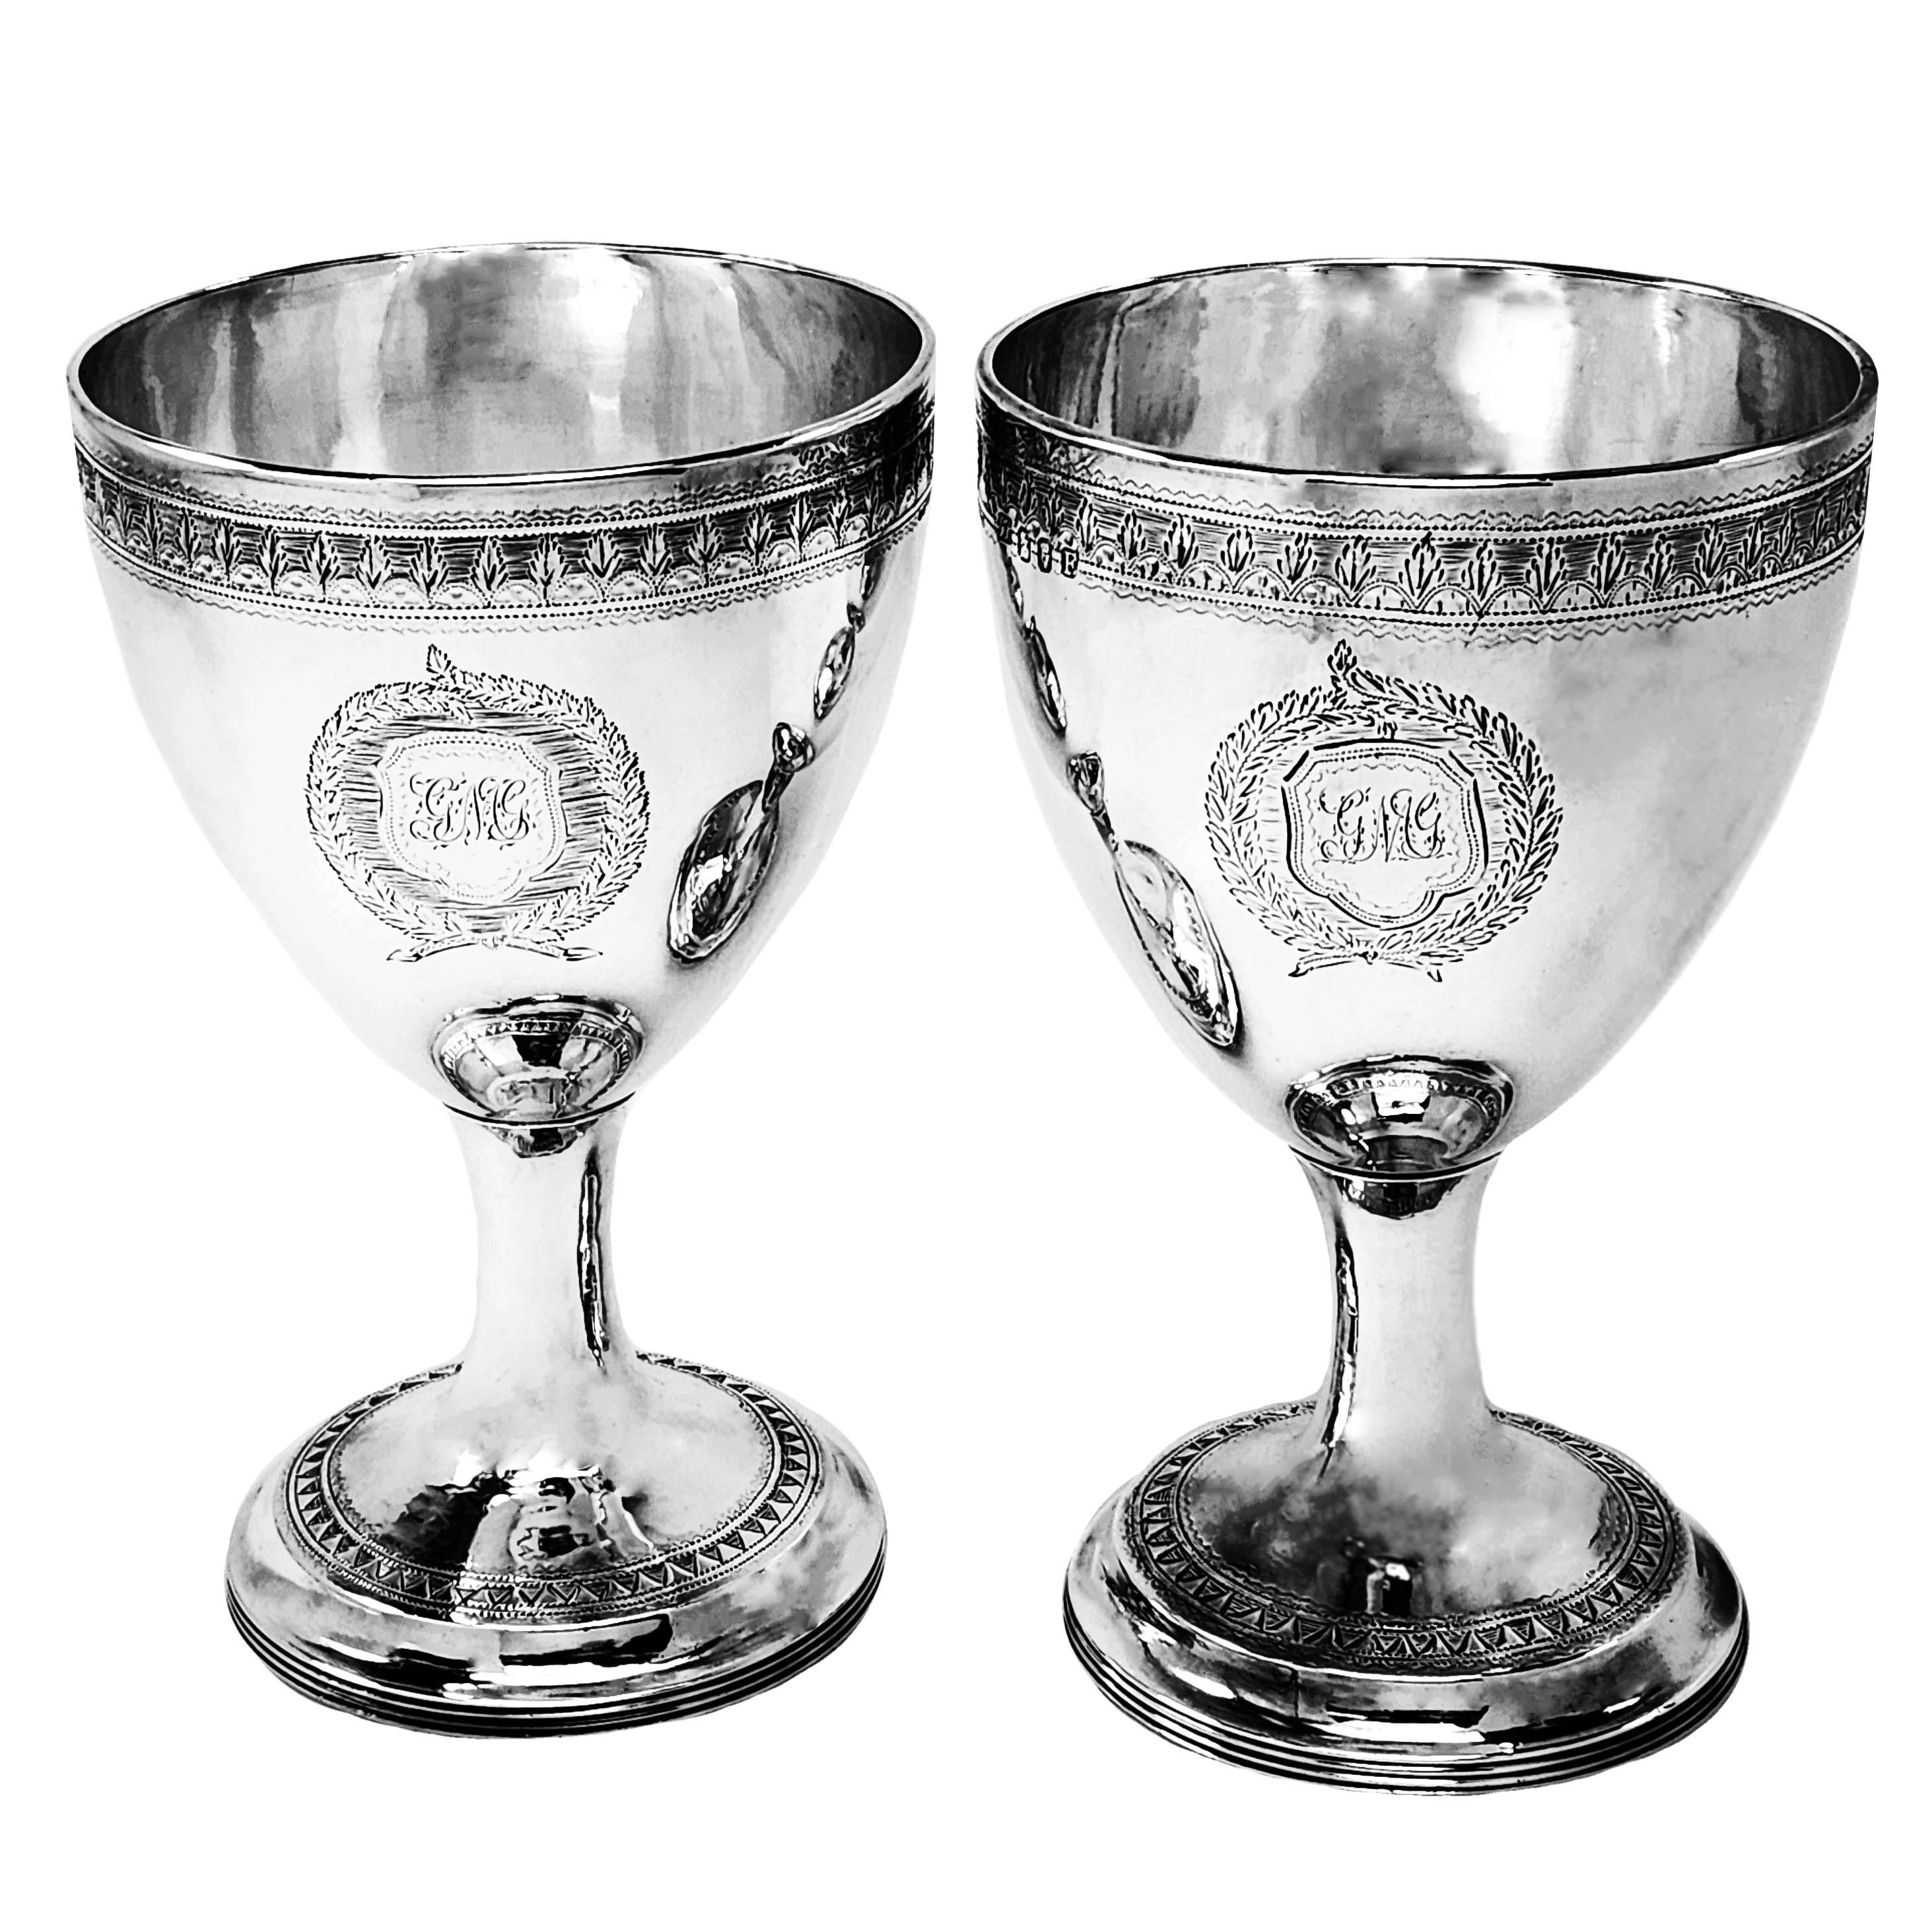 A pair of Antique Irish George III Silver Wine Goblets. These Goblets are of excellent size and each is embellished with bands of engraved patterns and each has two engraved crests.

Made in Dublin in 1802 & 1808 by Gustavas Byrne

Approx. Weight –